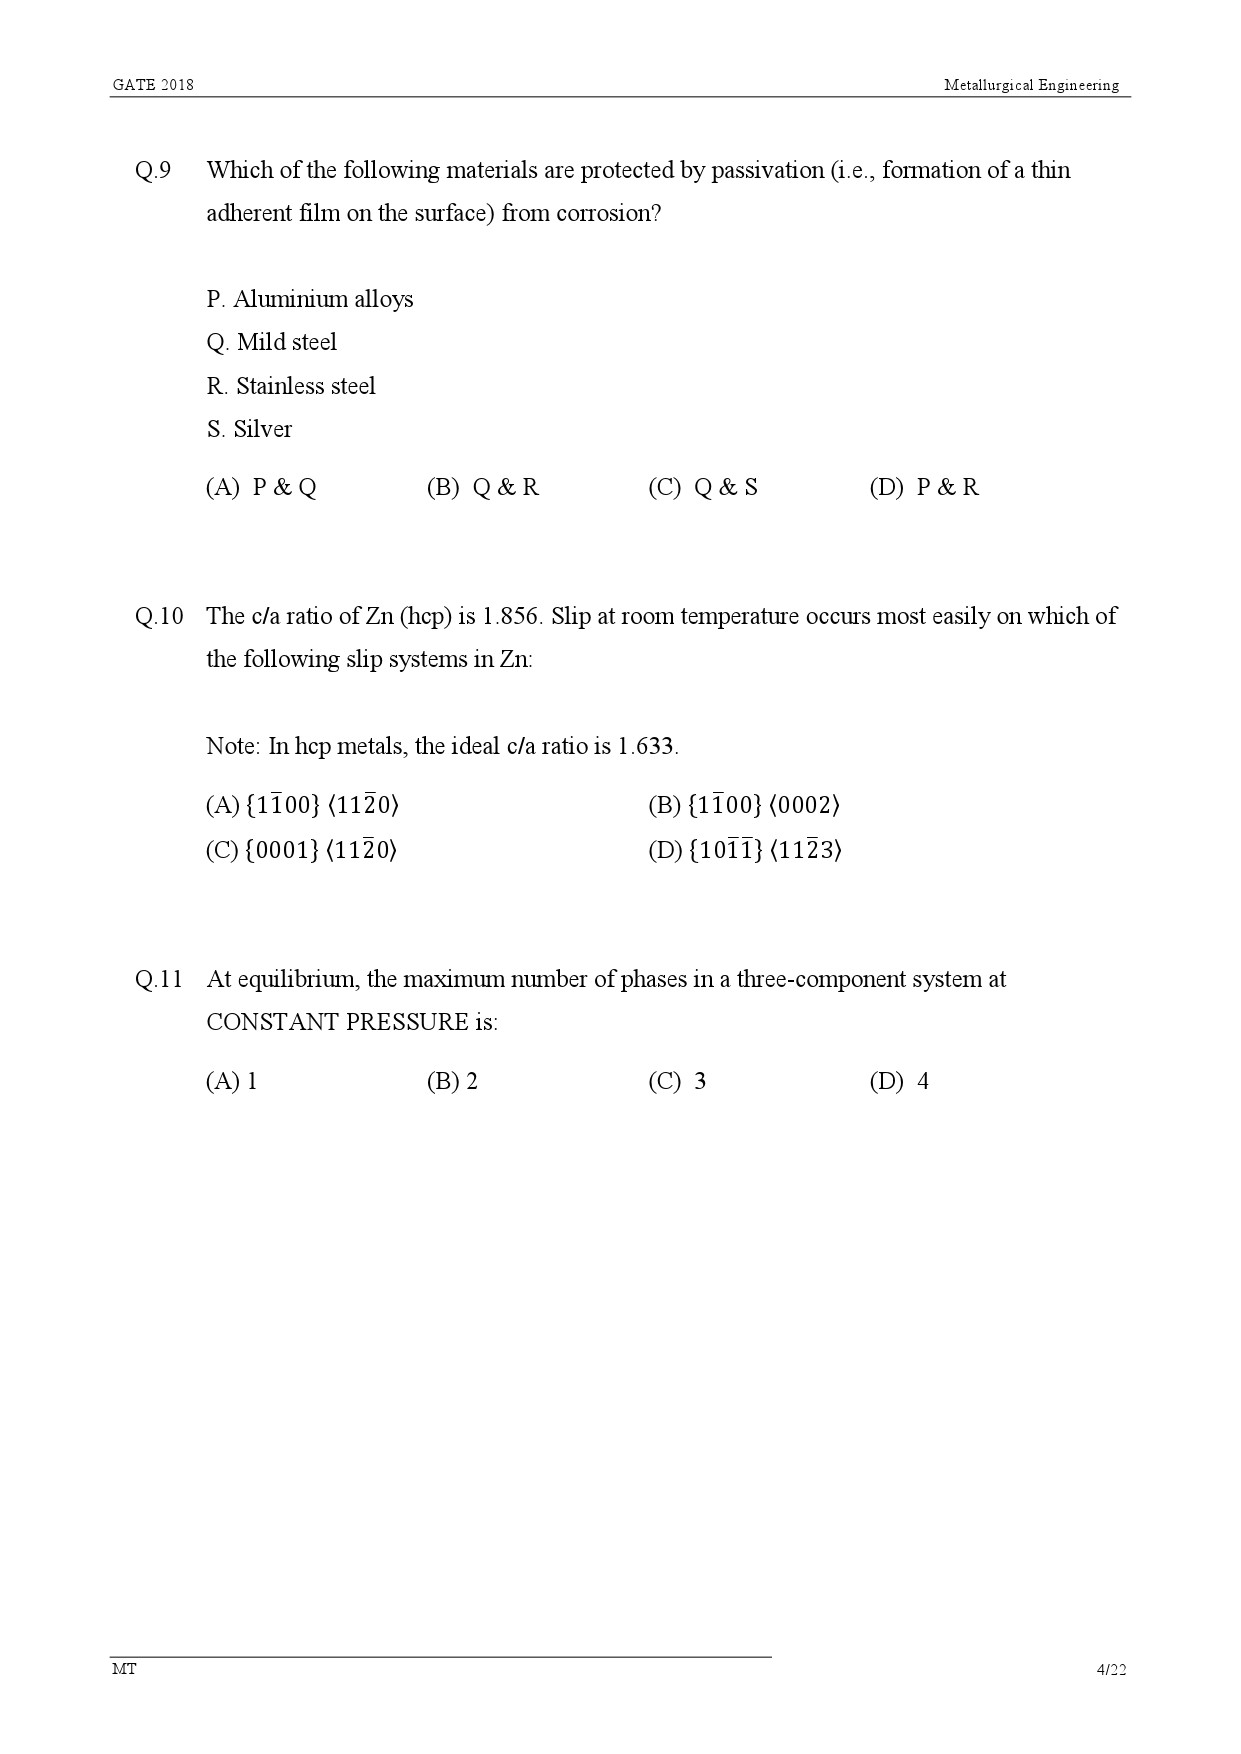 GATE Exam Question Paper 2018 Metallurgical Engineering 6